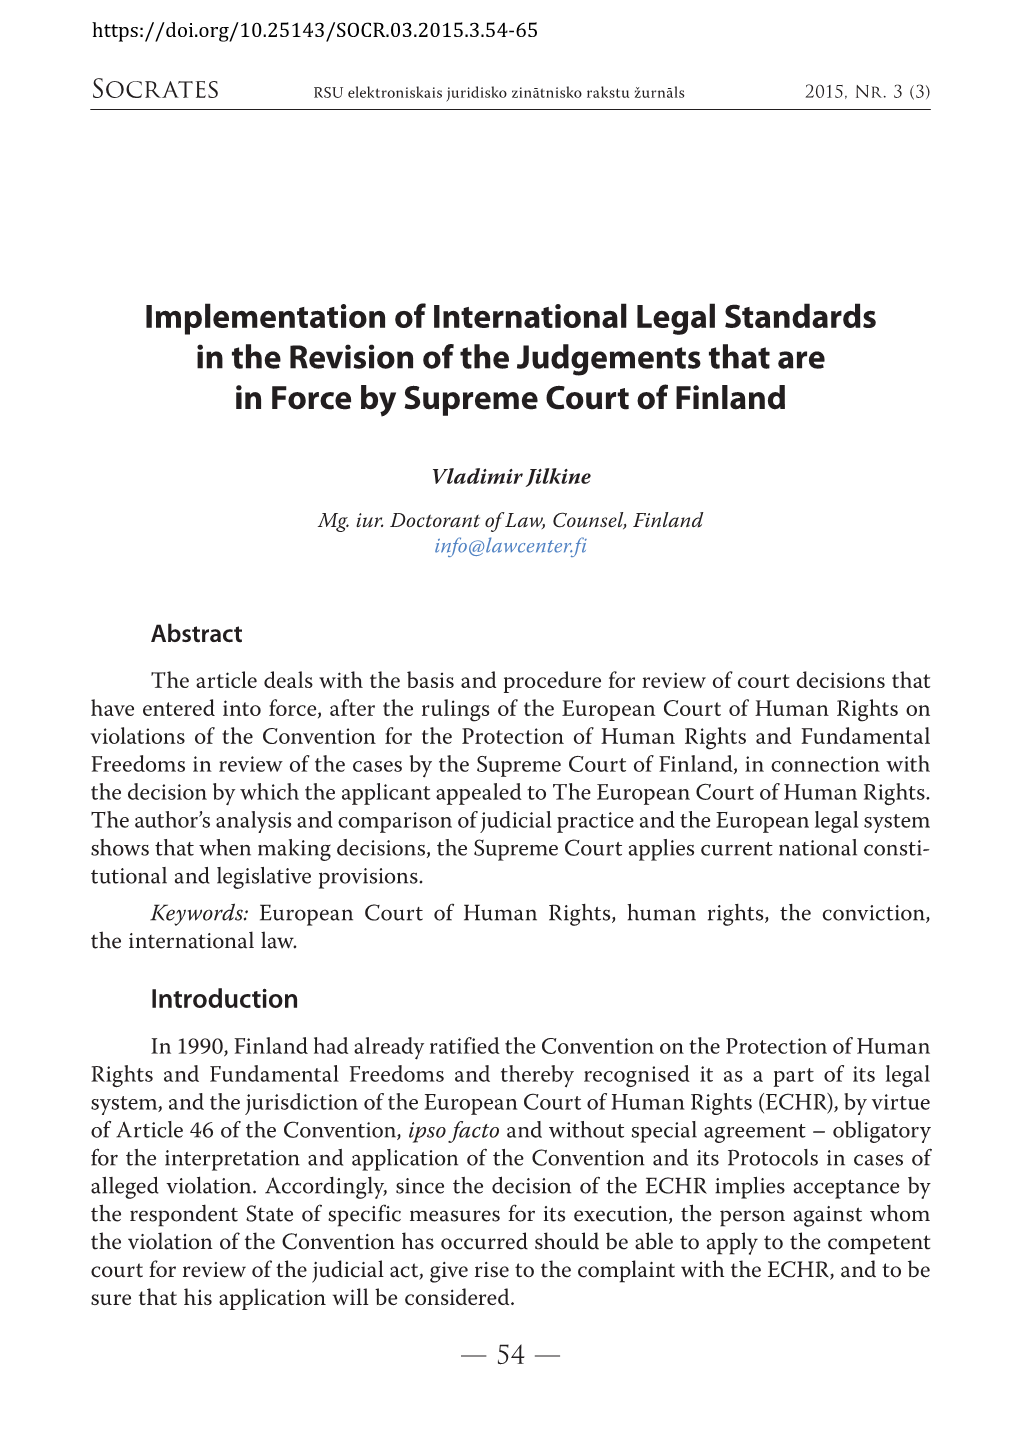 Implementation of International Legal Standards in the Revision of the Judgements That Are in Force by Supreme Court of Finland